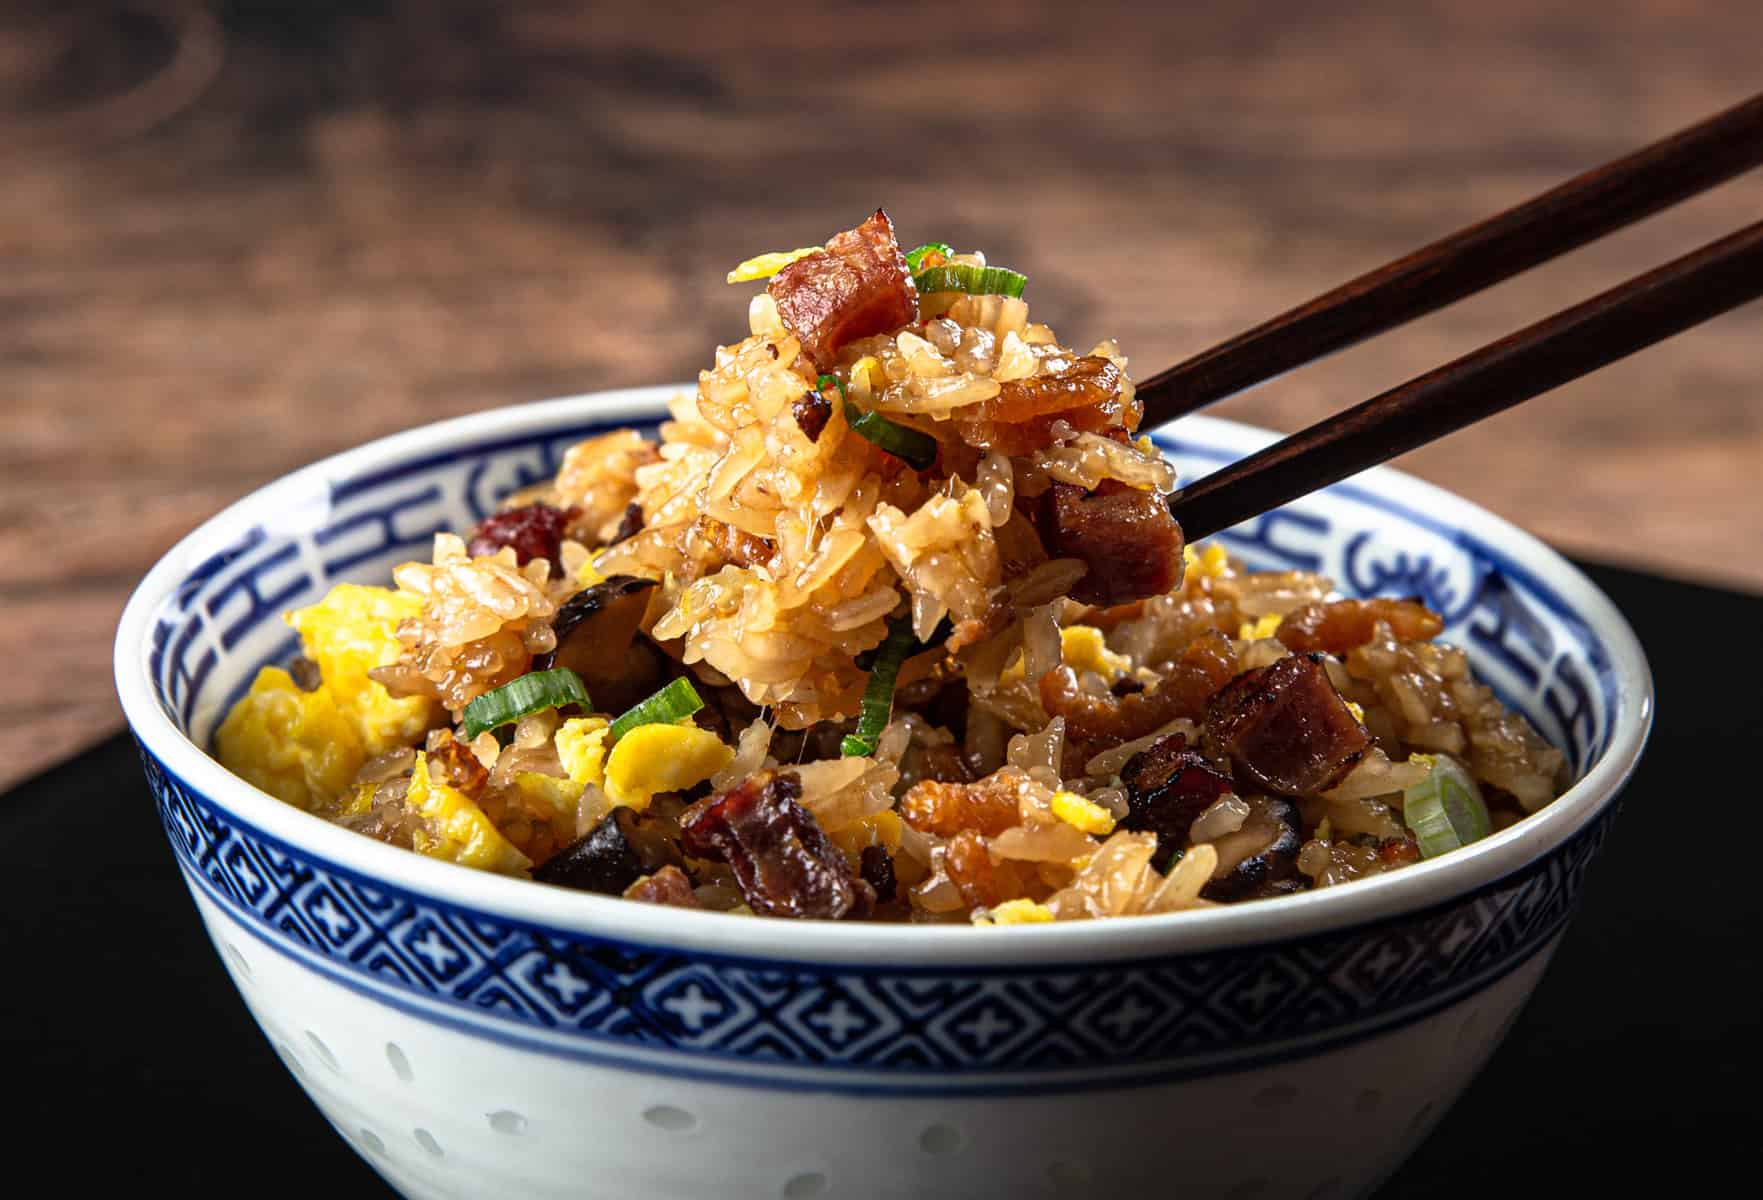 https://www.pressurecookrecipes.com/wp-content/uploads/2022/02/instant-pot-chinese-sticky-rice.jpg